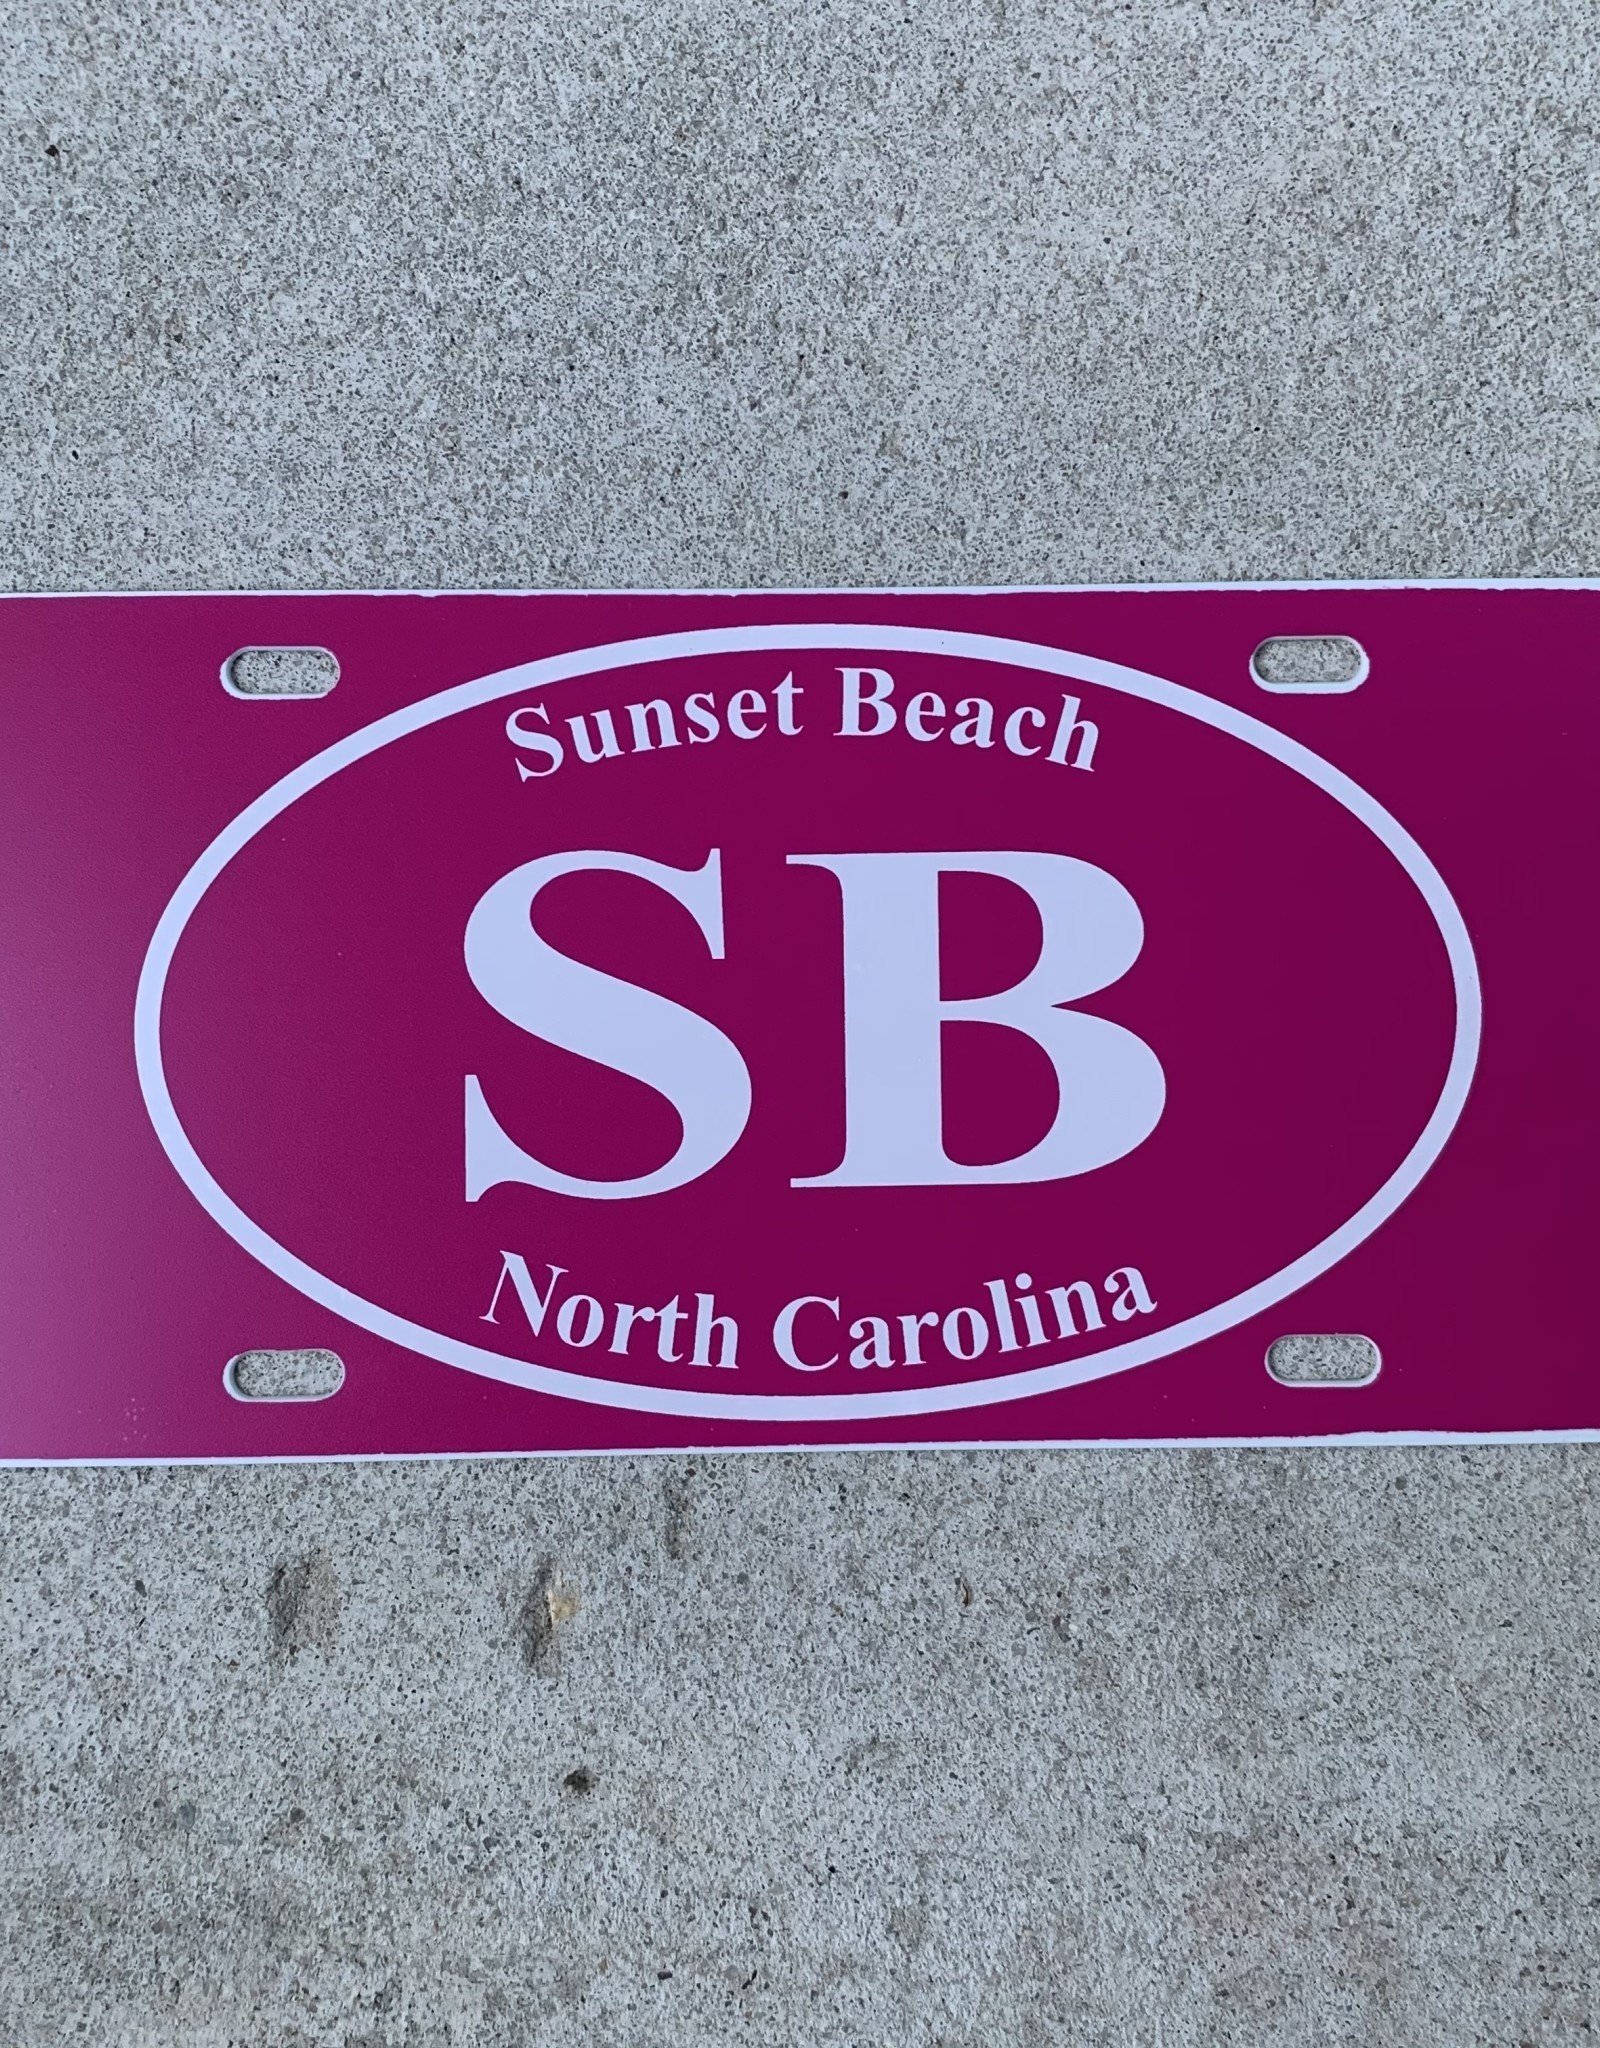 SB EURO WHITE ON PINK LICENSE PLATE